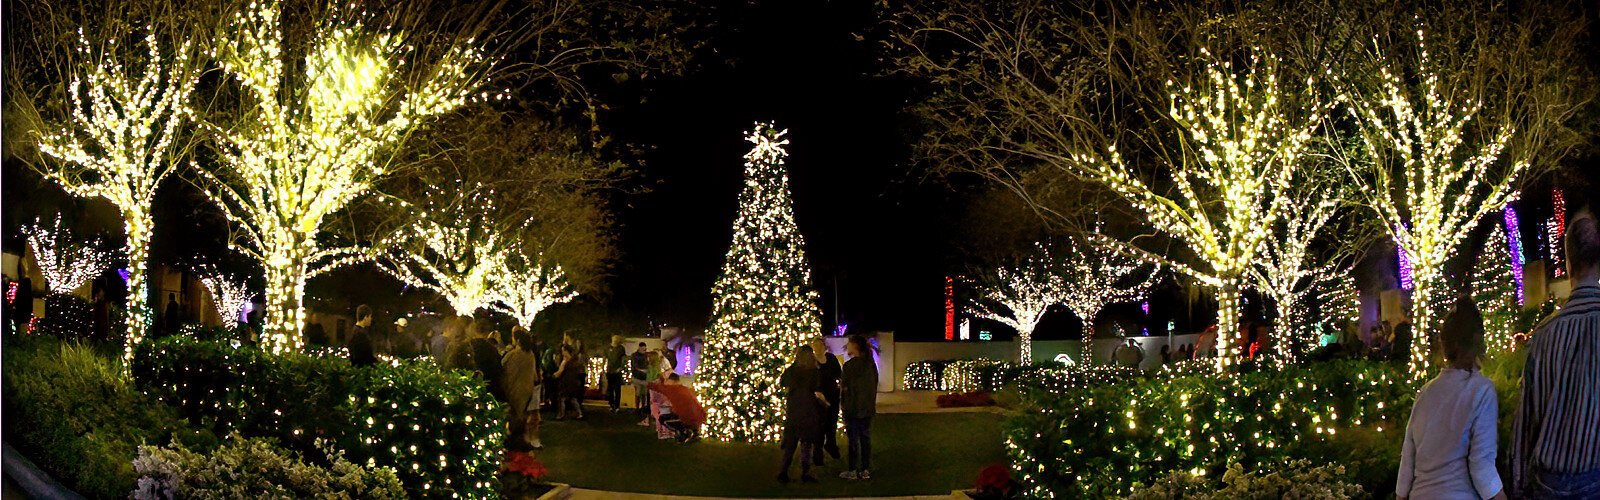 Sponsored by the Florida Botanical Gardens Foundation, this family-friendly event offers amazing lighting displays as well as nightly entertainment and visits from Santa.